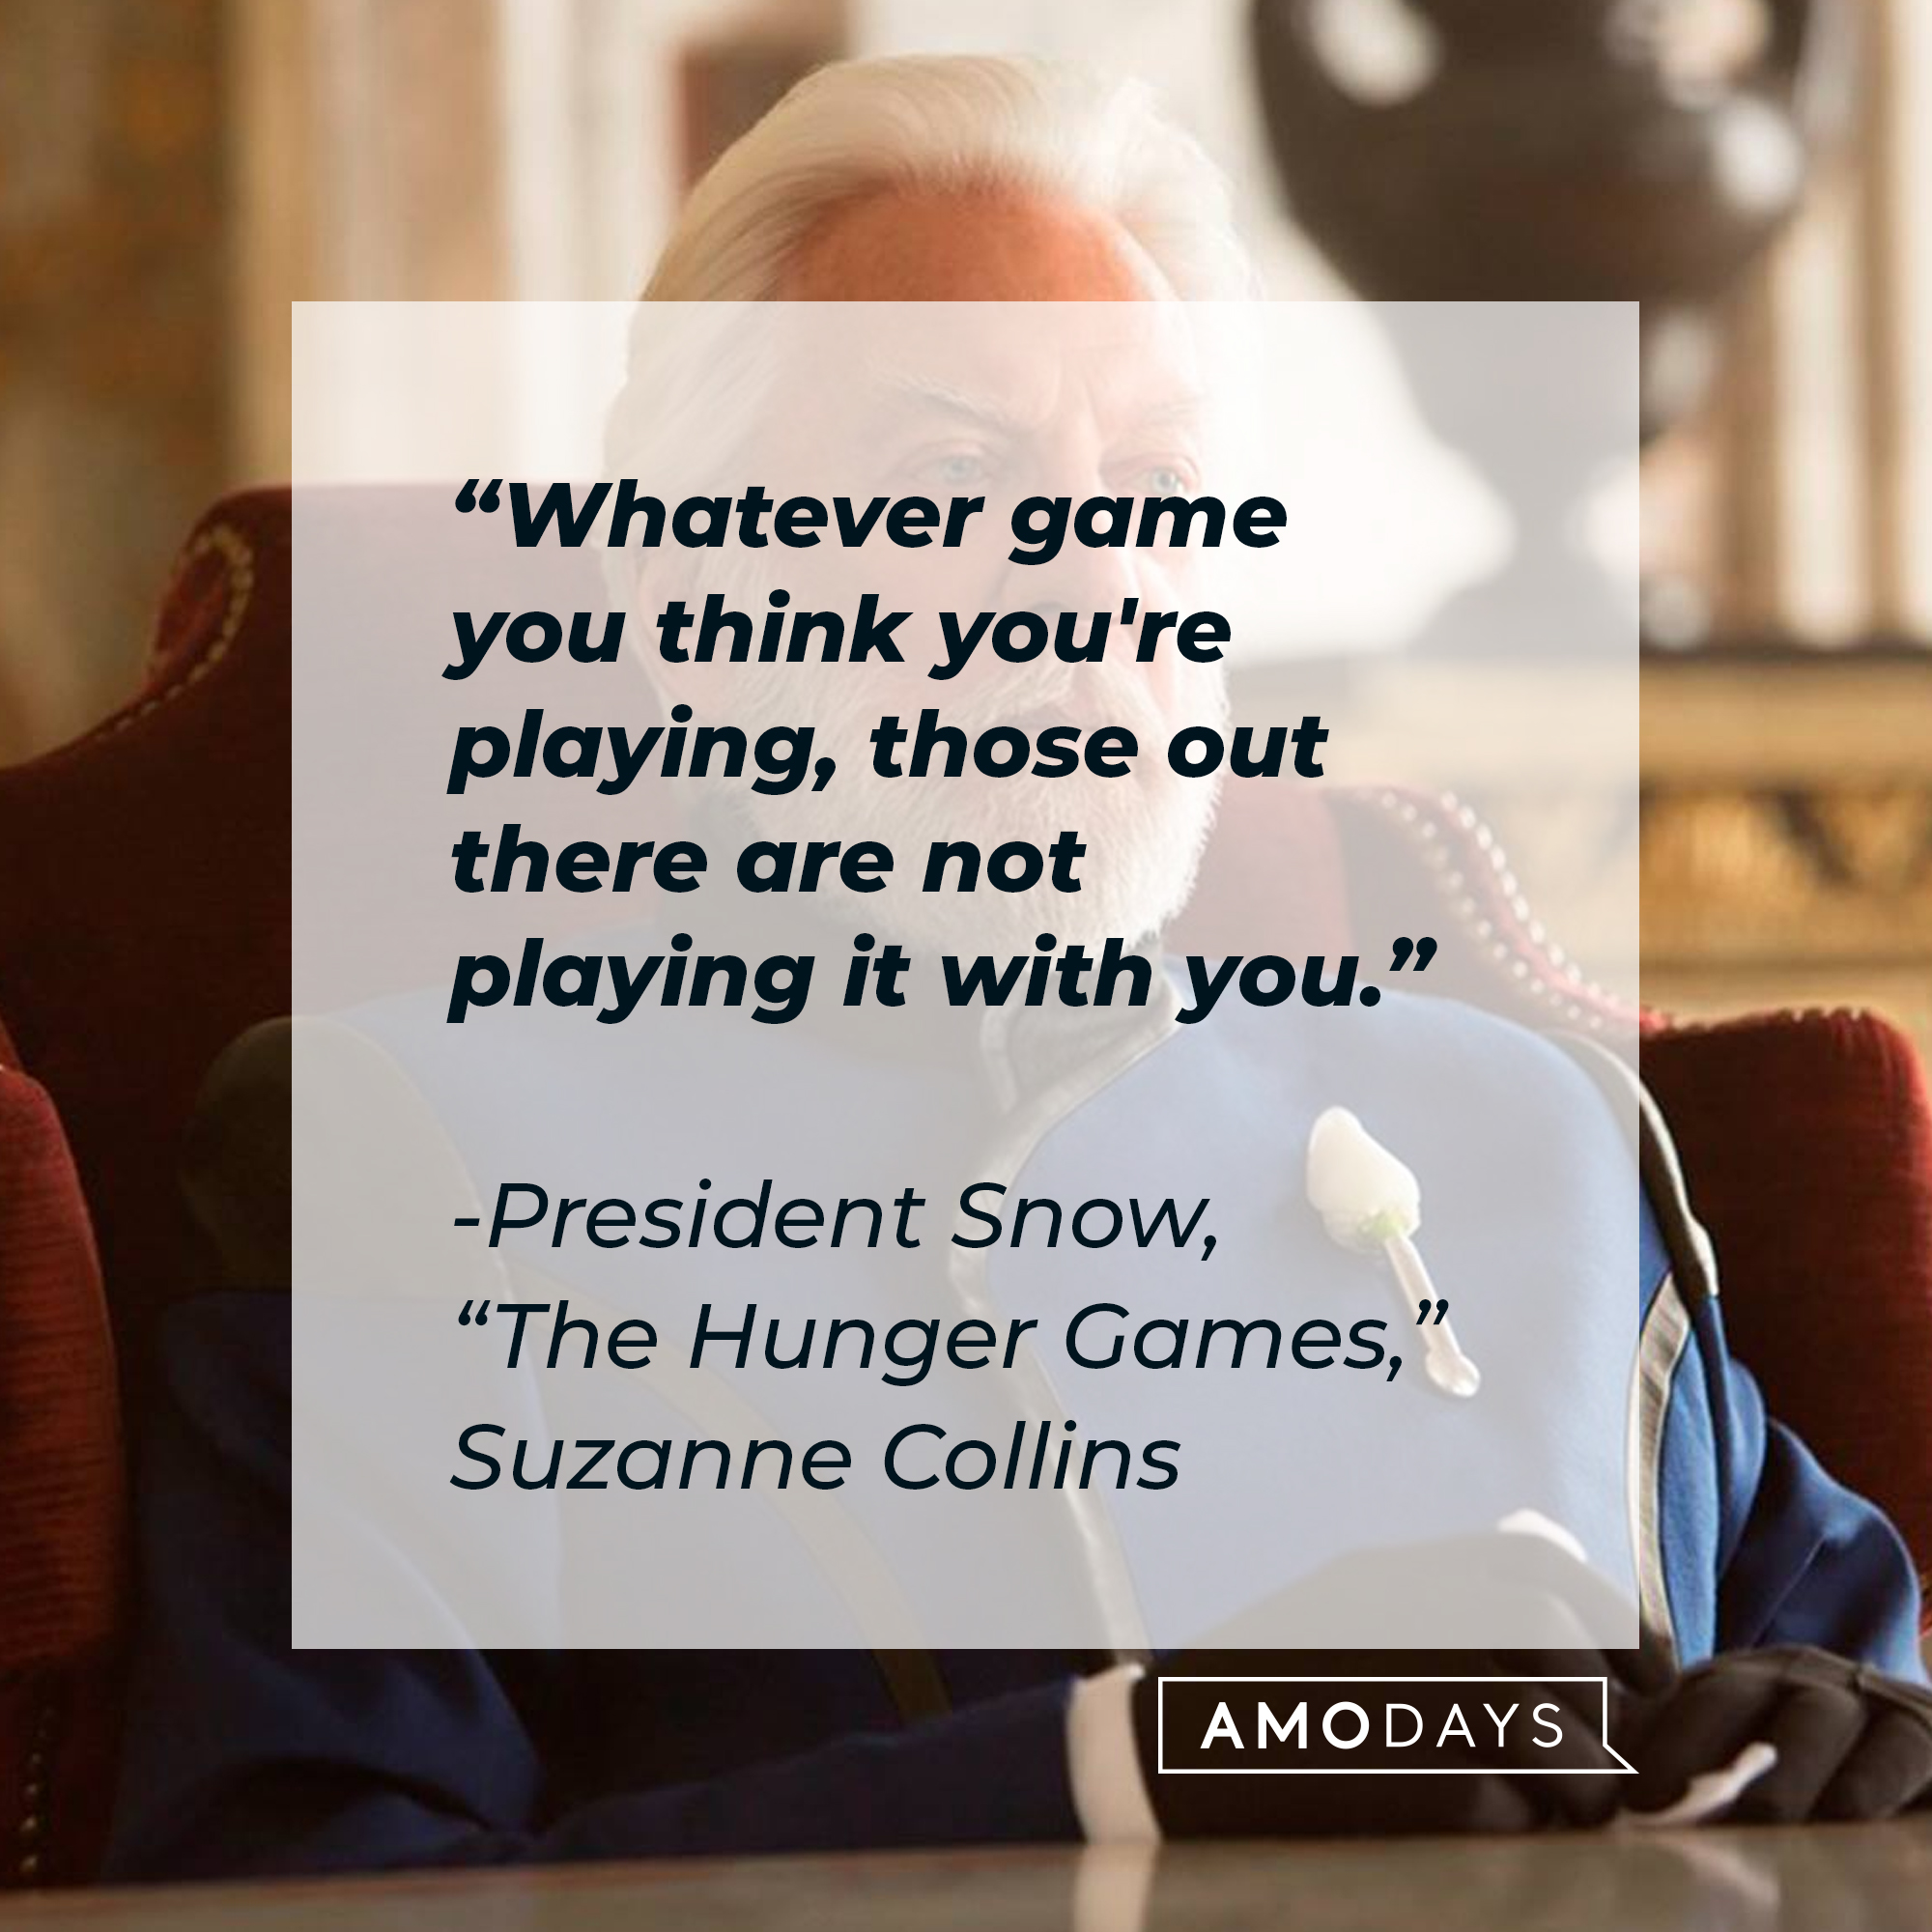 President Snow, with his quote from Suzanne Collins’ “Hunger Games,”: “Whatever game you think you're playing, those out there are not playing it with you.” | Source: facebook.com/TheHungerGamesMovie